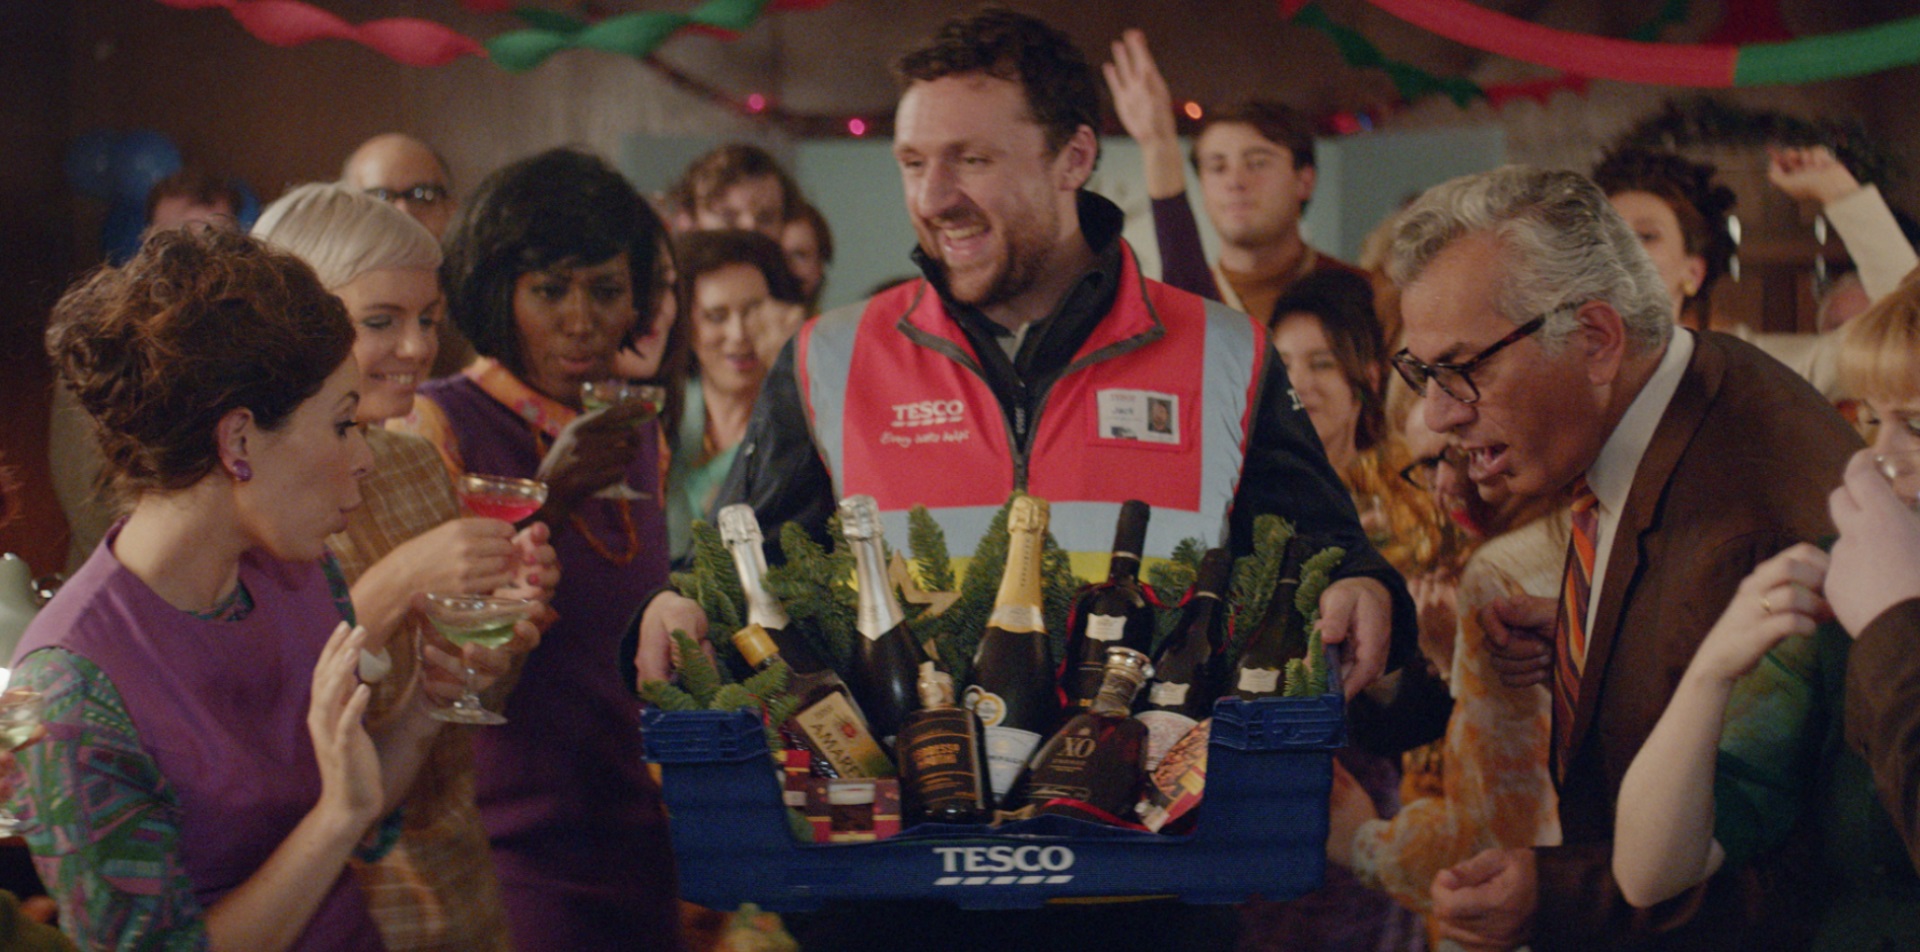 A Tesco delivery driver goes back in time in its new ad